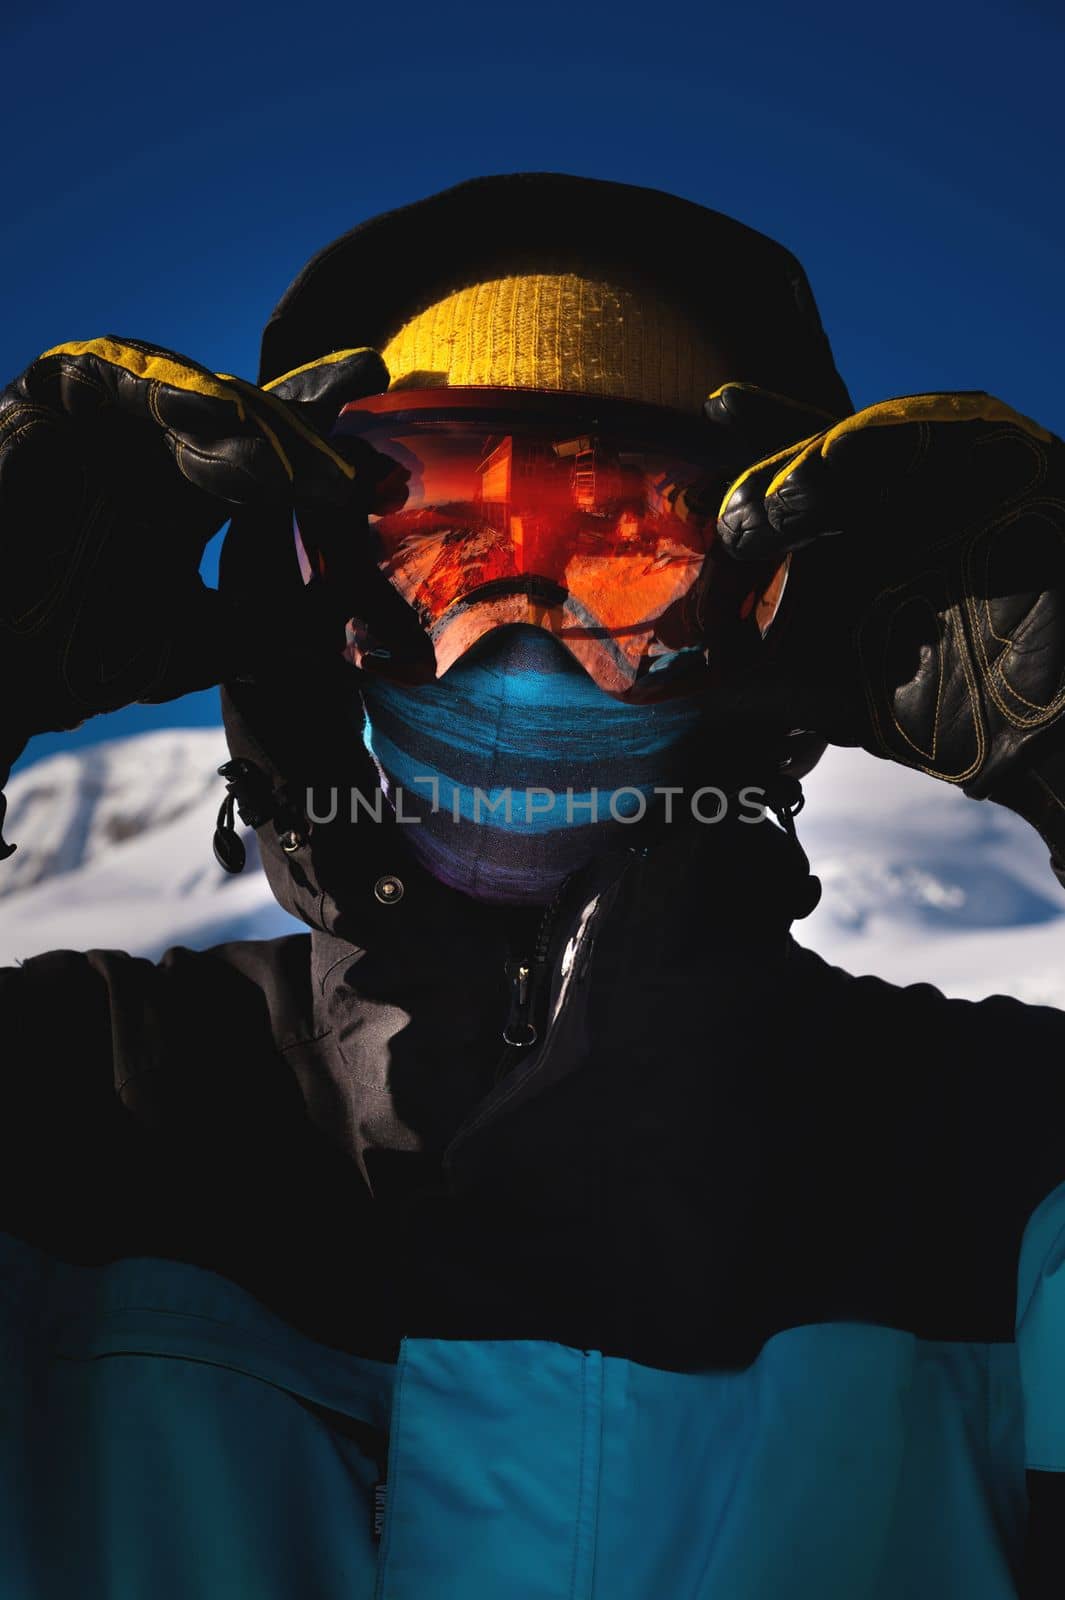 Close-up portrait of a skier in a mask with a closed face against the backdrop of snow capped mountains and blue sky on a bright sunny day by yanik88